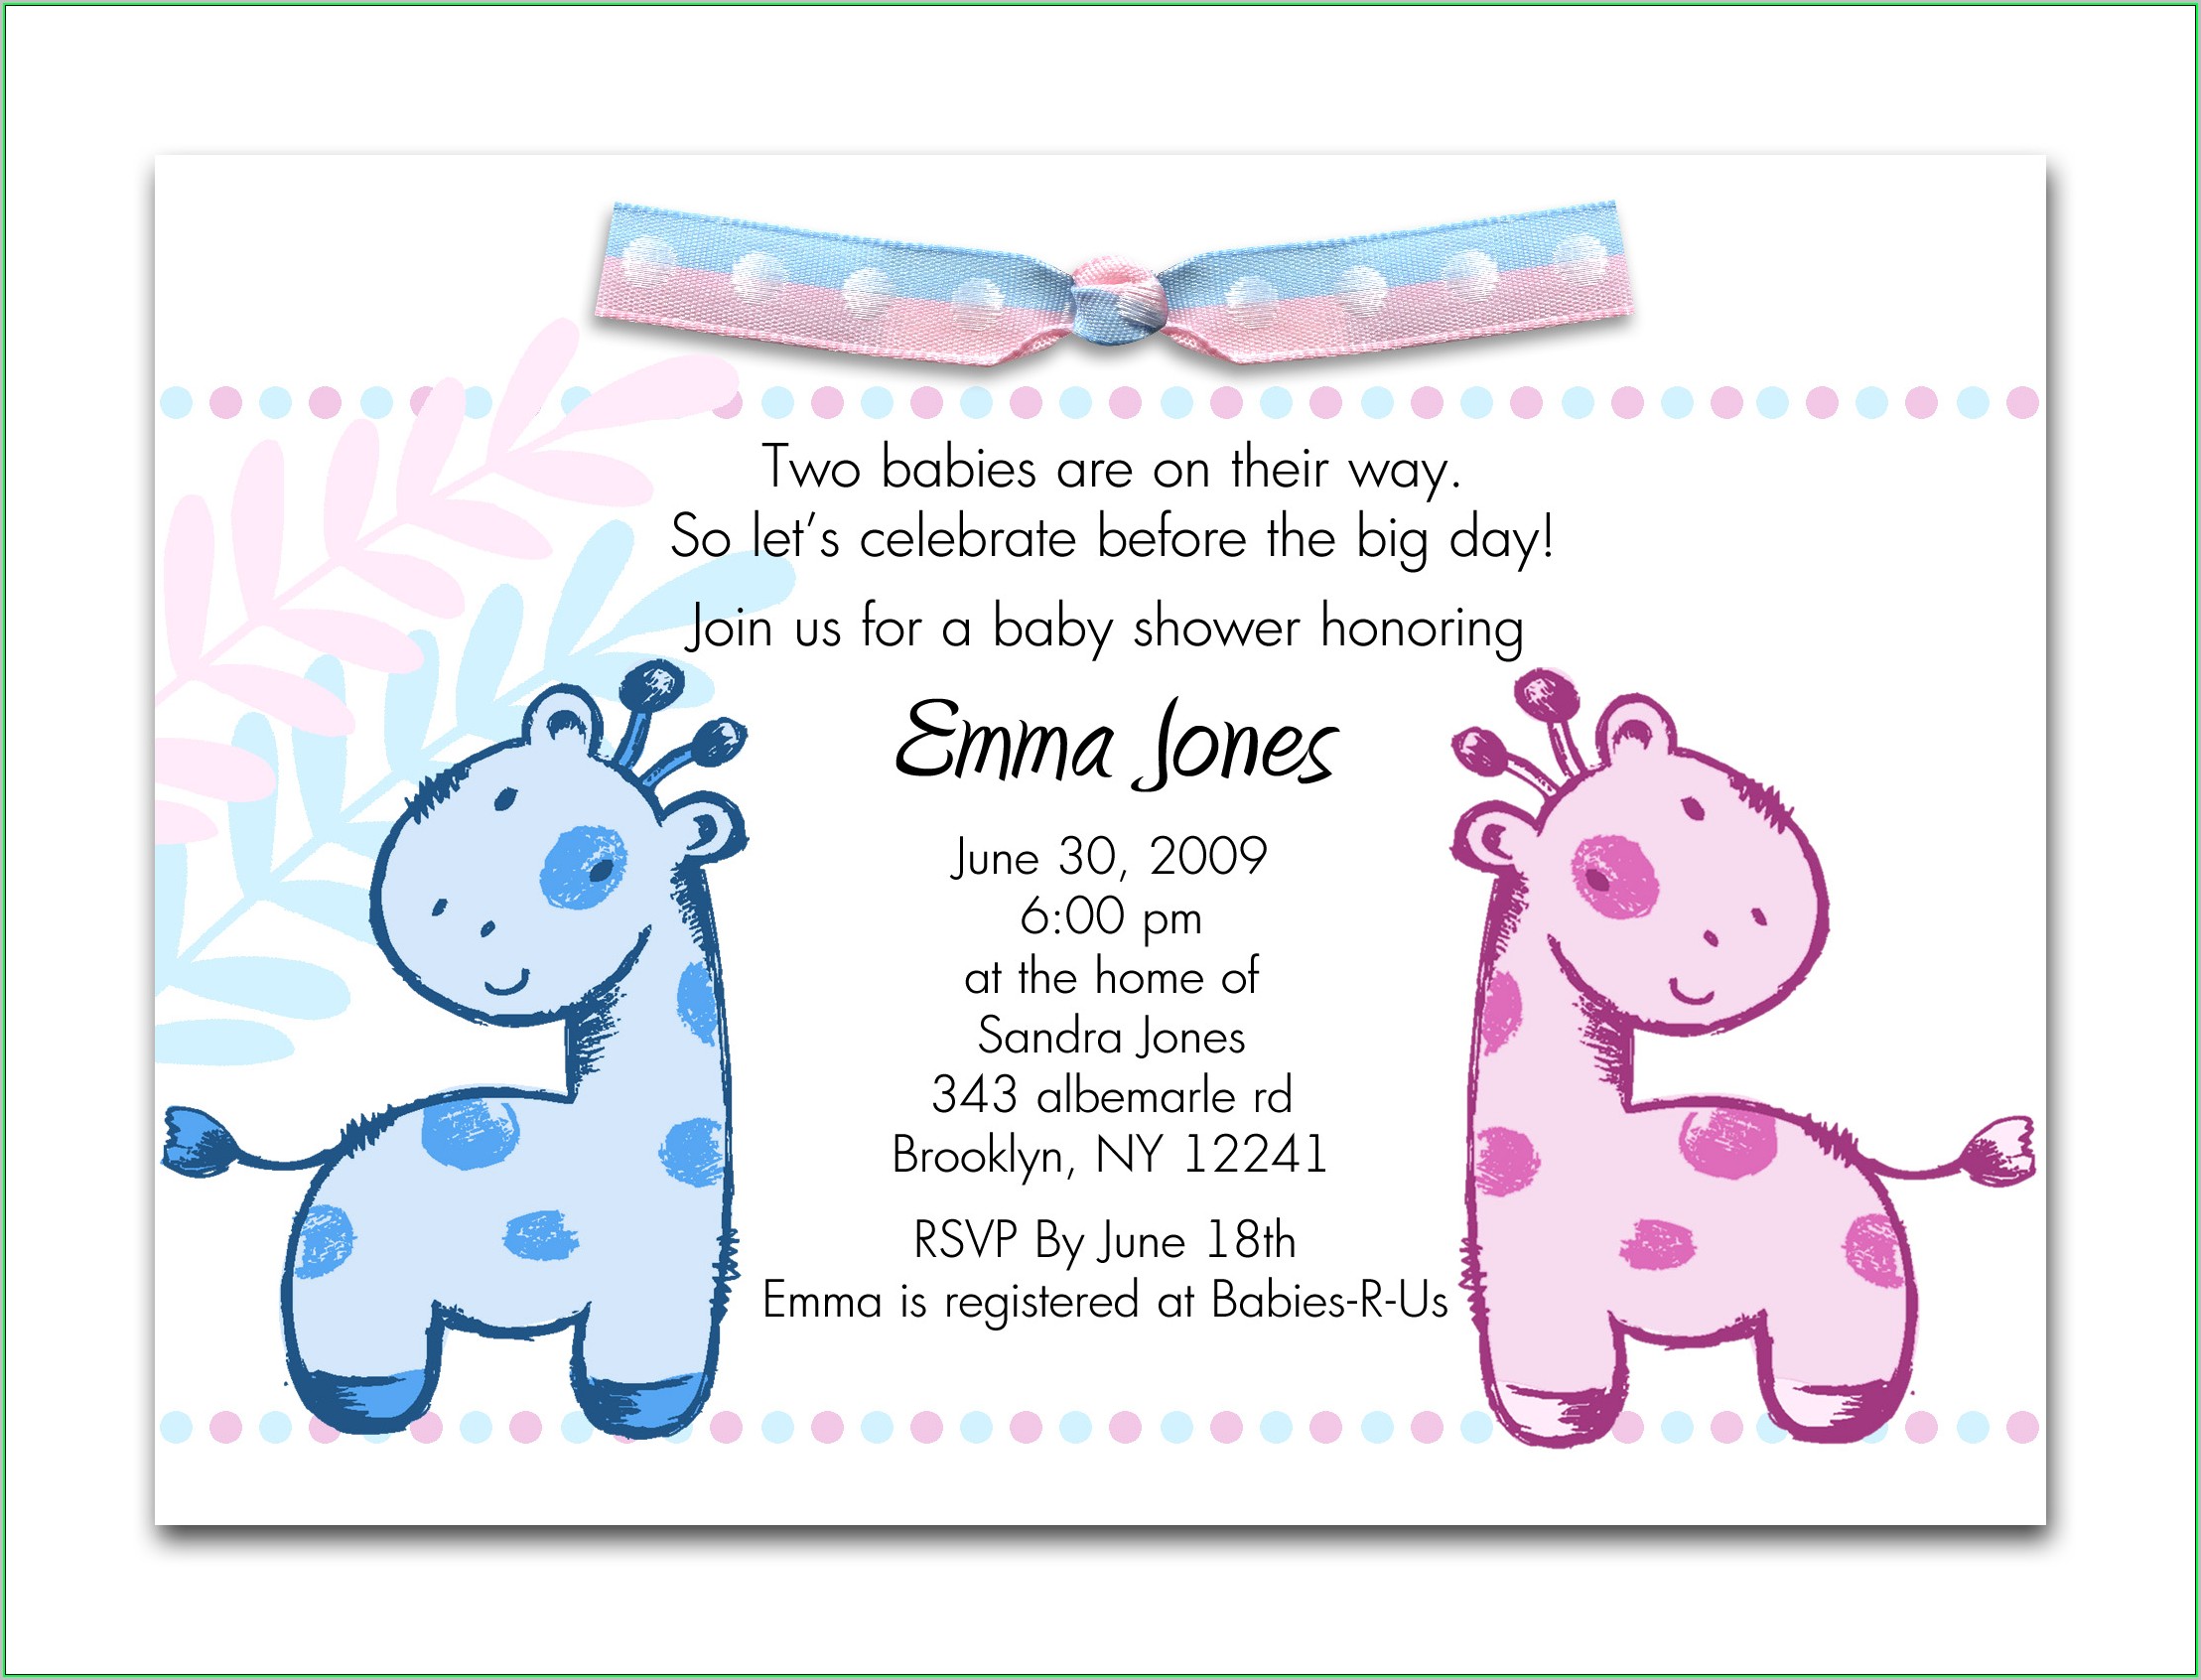 21 Posts Related to Online Baby Shower Invitation Templates.